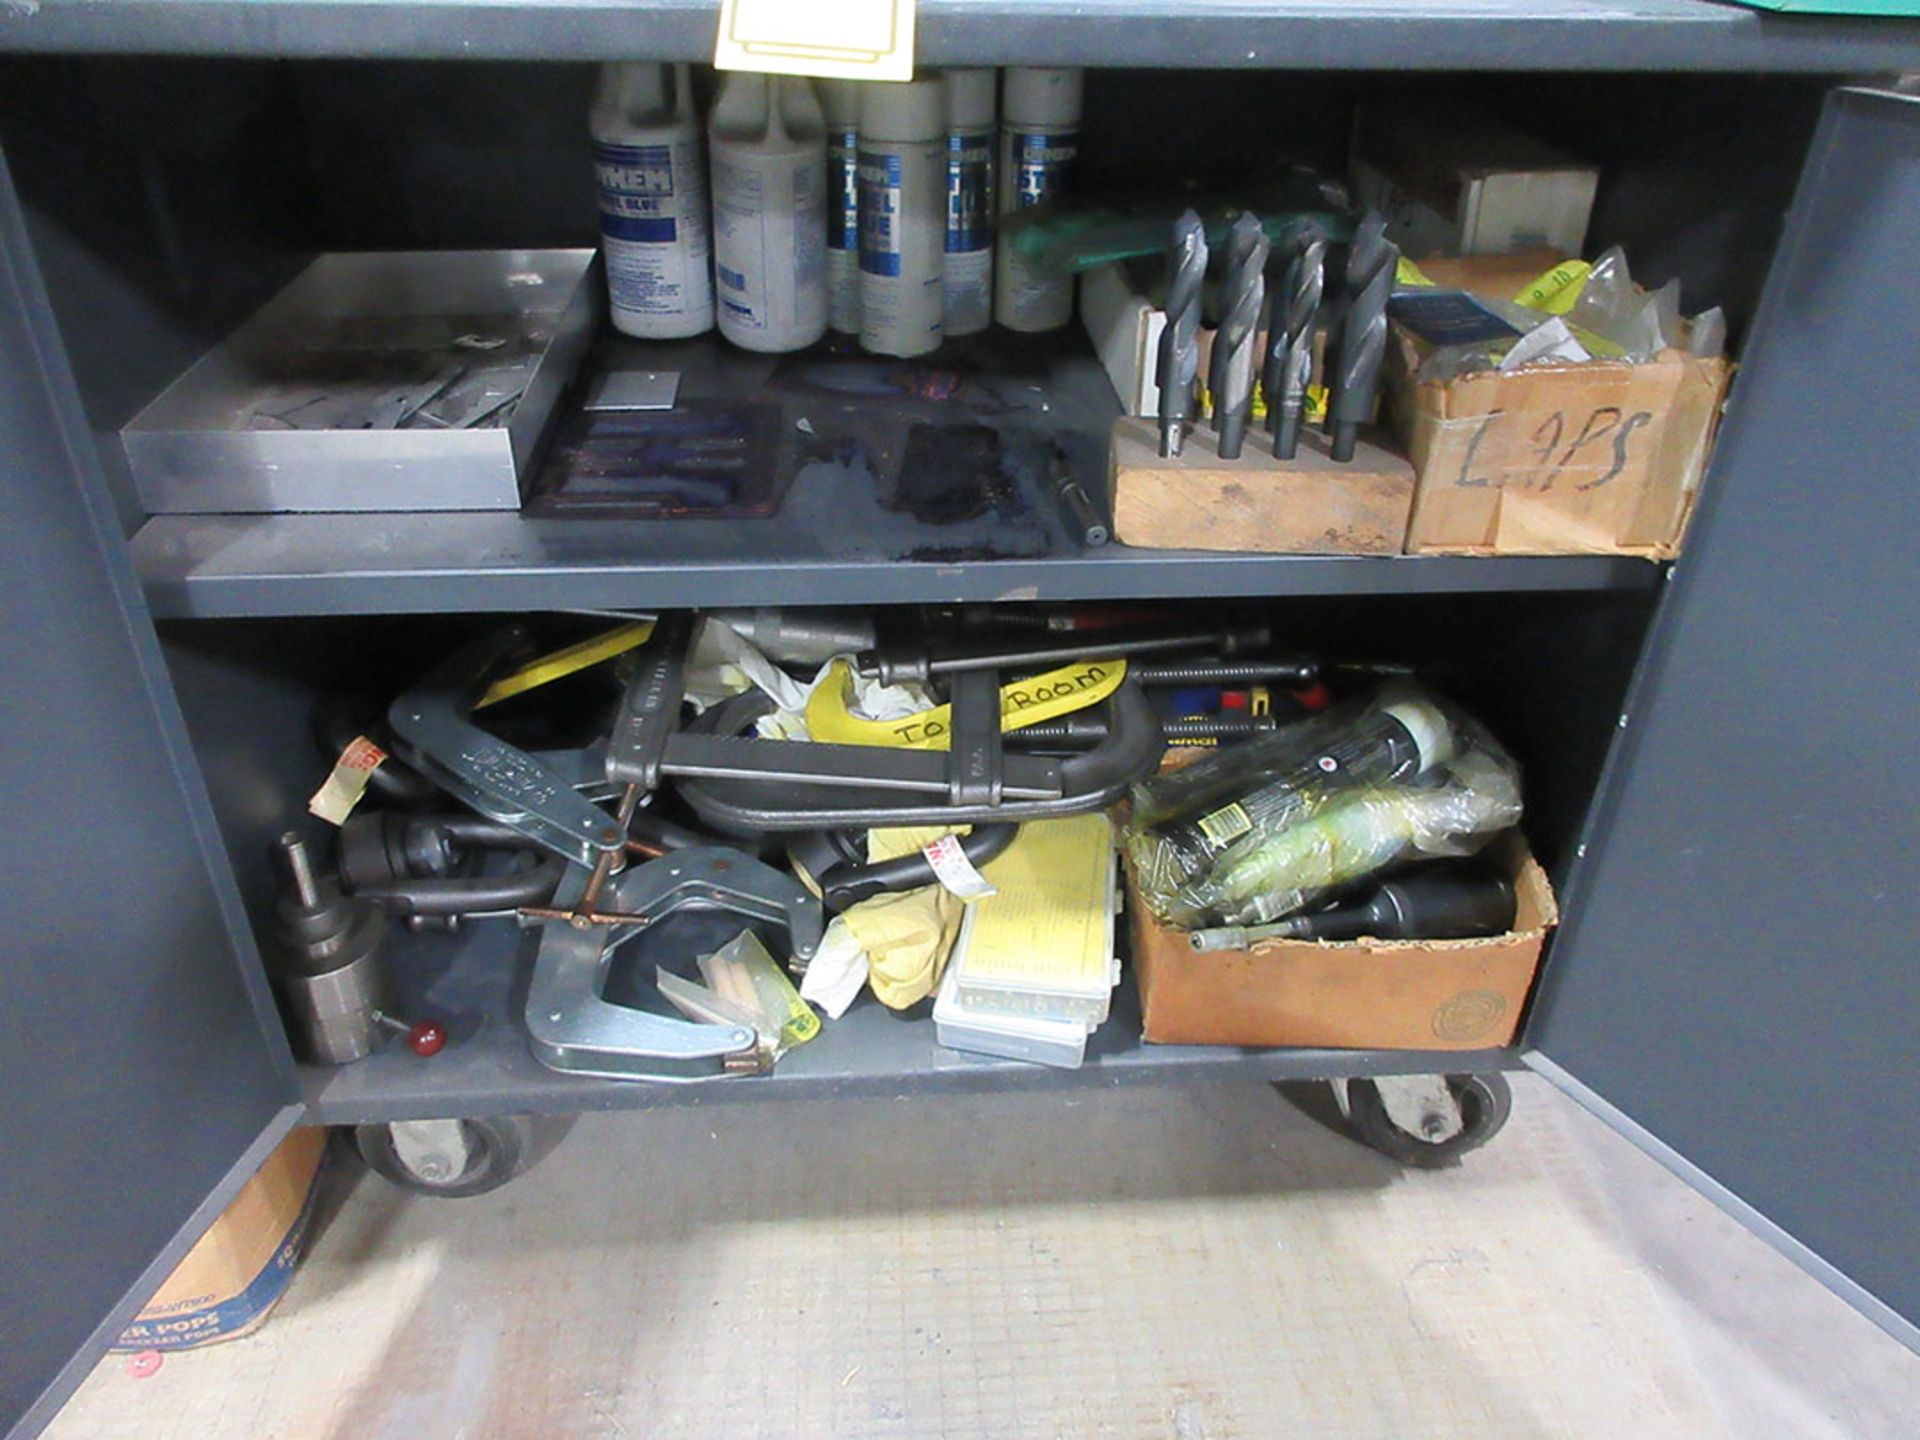 WALL COLMONOY CORP. FUSE WELDER TORCH & CABINET WITH CONTENTS; CLAMPS, AND DRILL BITS - Image 2 of 2